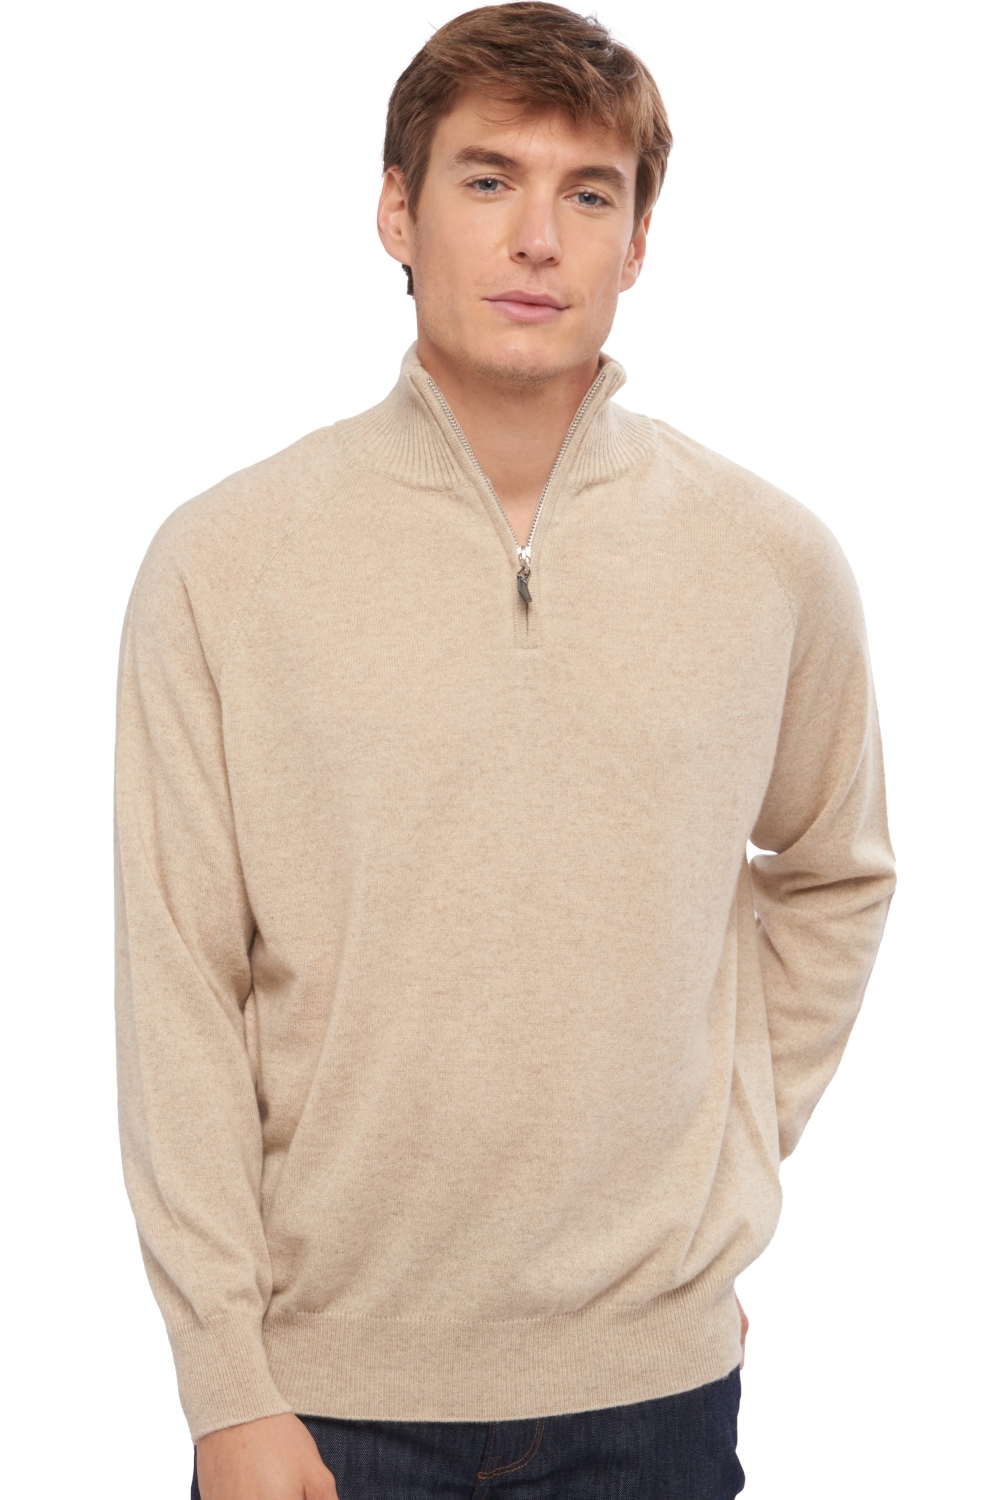 Cashmere men polo style sweaters natural vez natural winter dawn 3xl